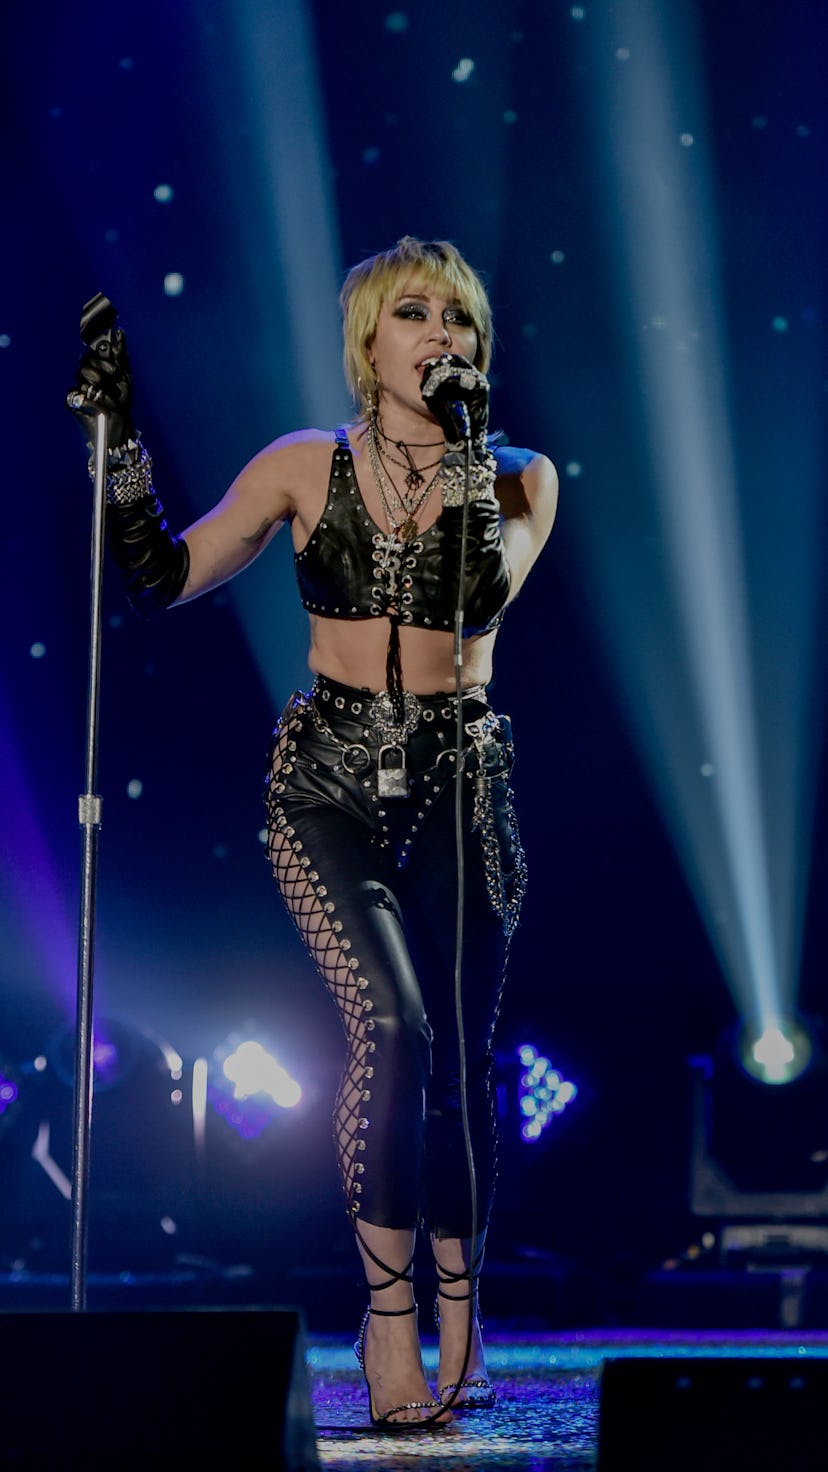 LOS ANGELES, CA – DECEMBER 31st: In this image released on December 31, Miley Cyrus performs at Dick...